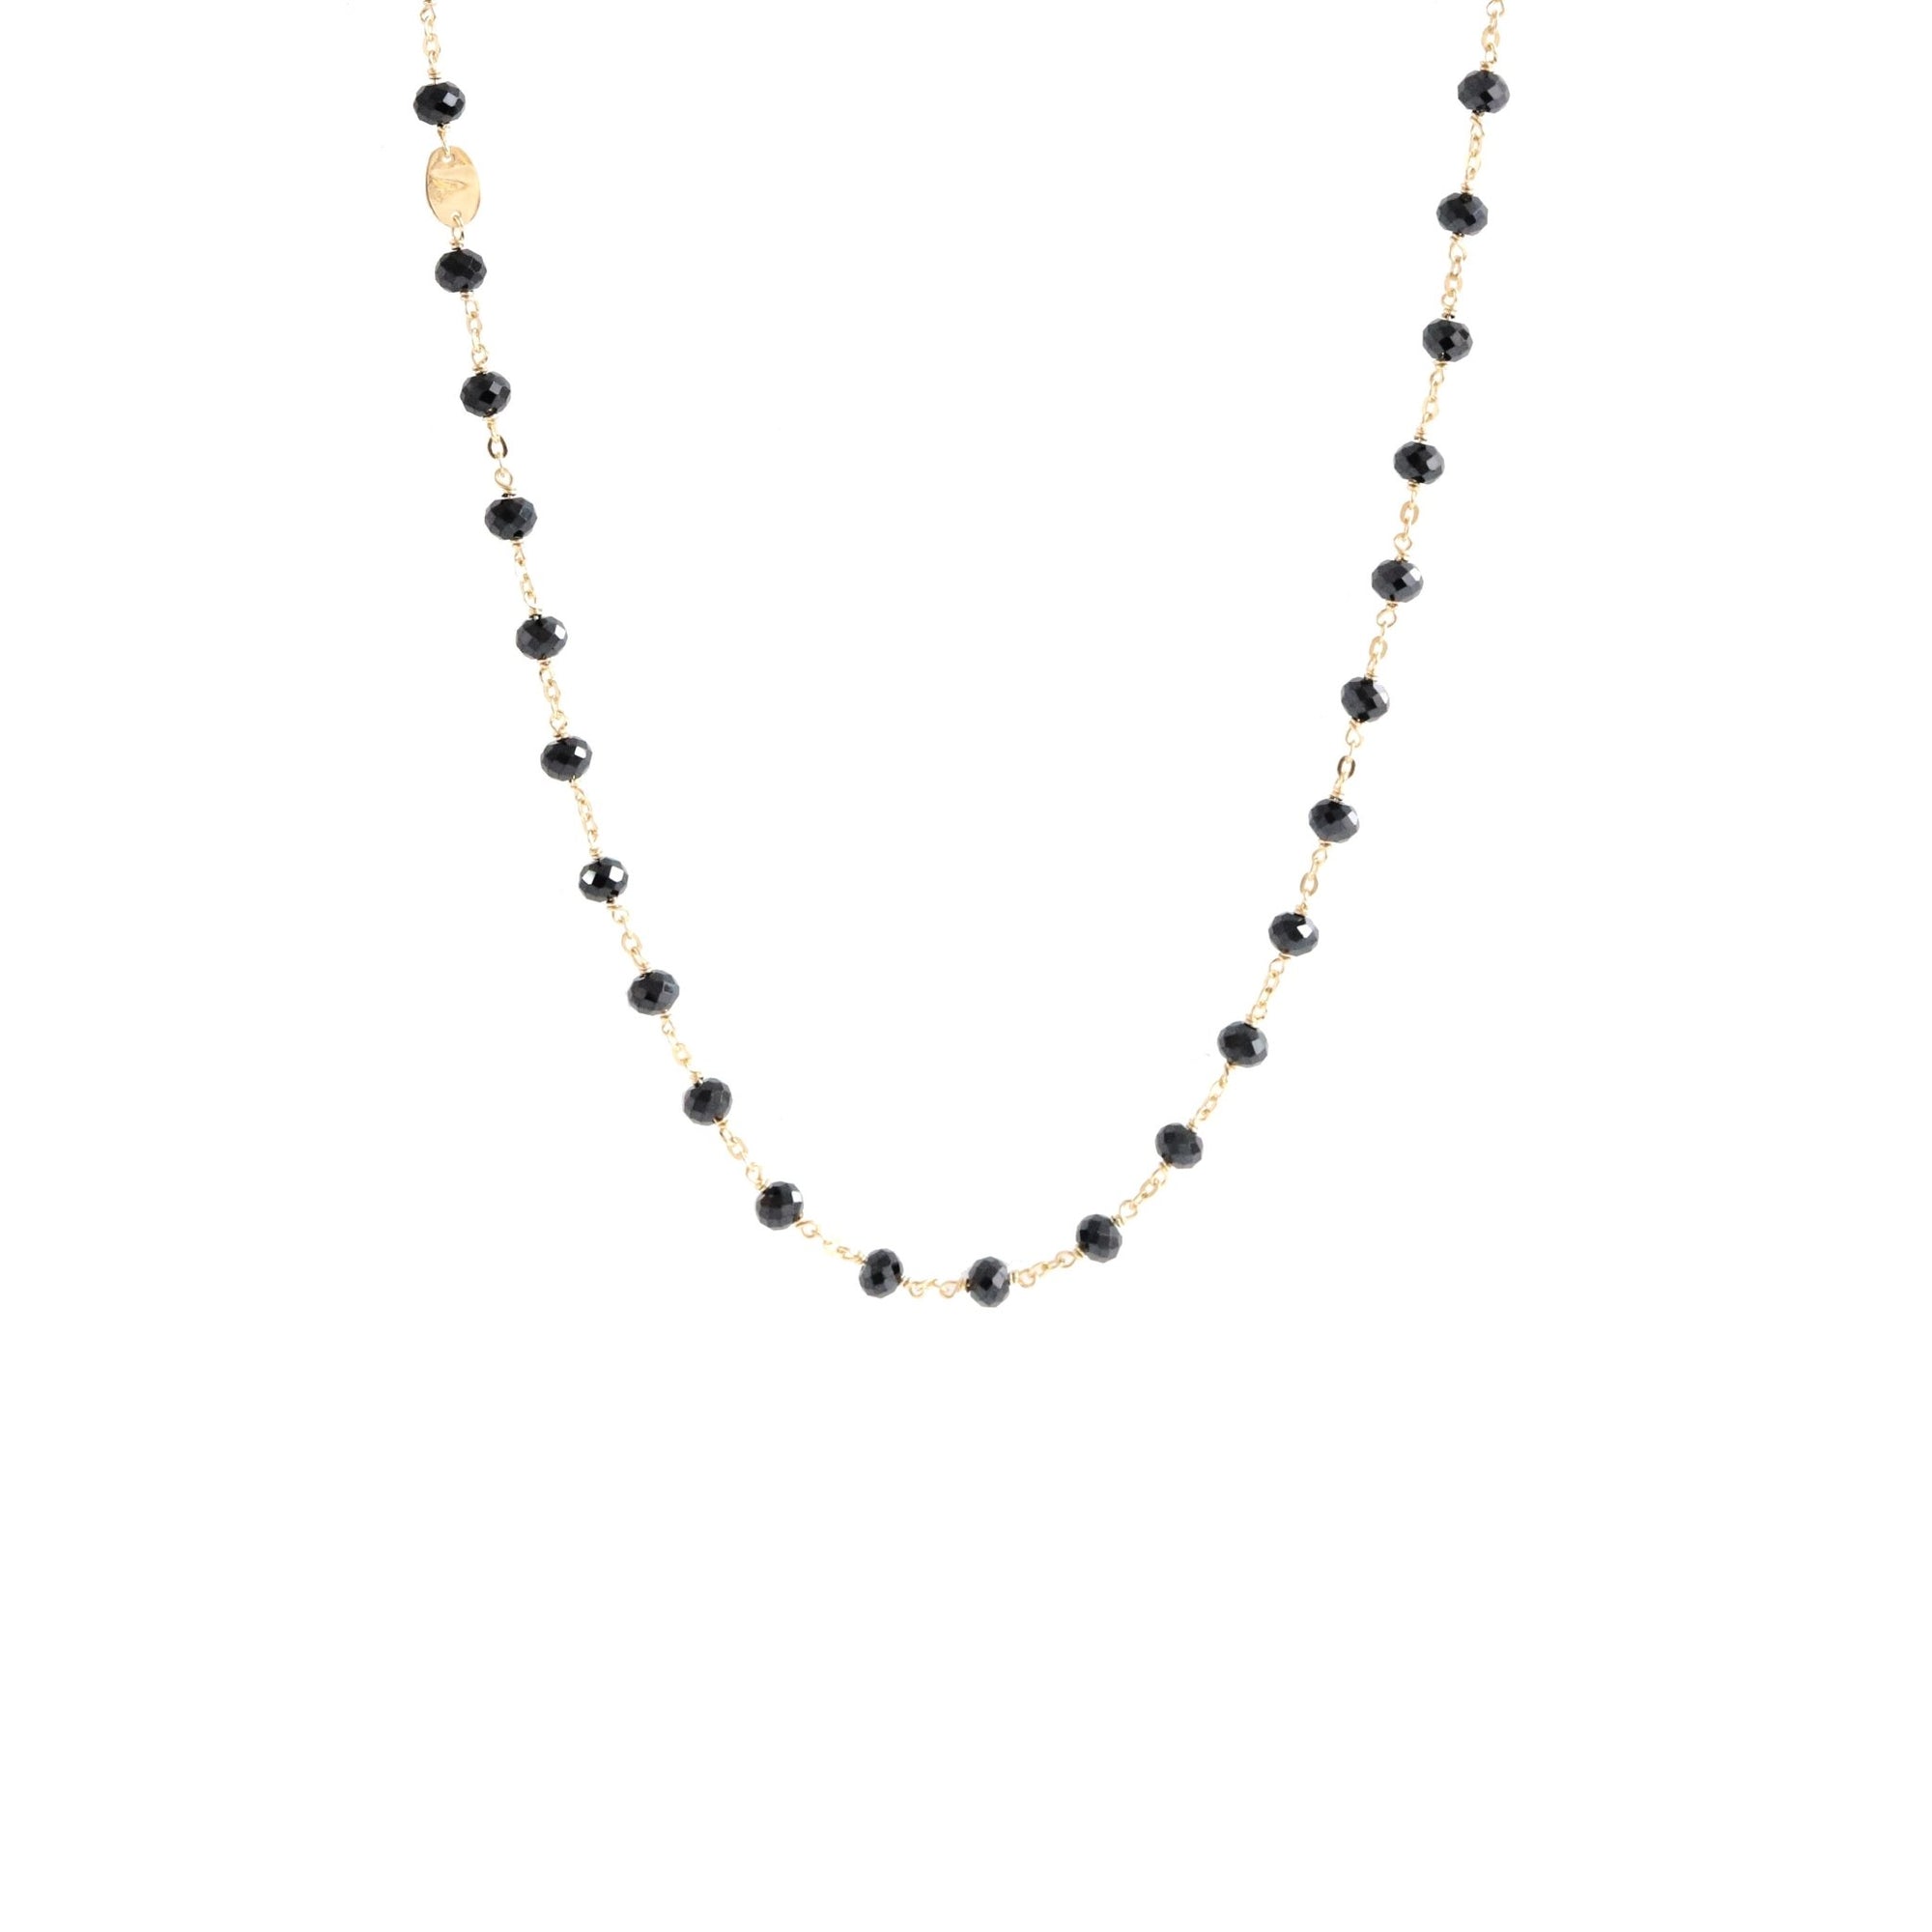 ICONIC MIDI BEADED NECKLACE - BLACK ONYX & GOLD 24-25" - SO PRETTY CARA COTTER